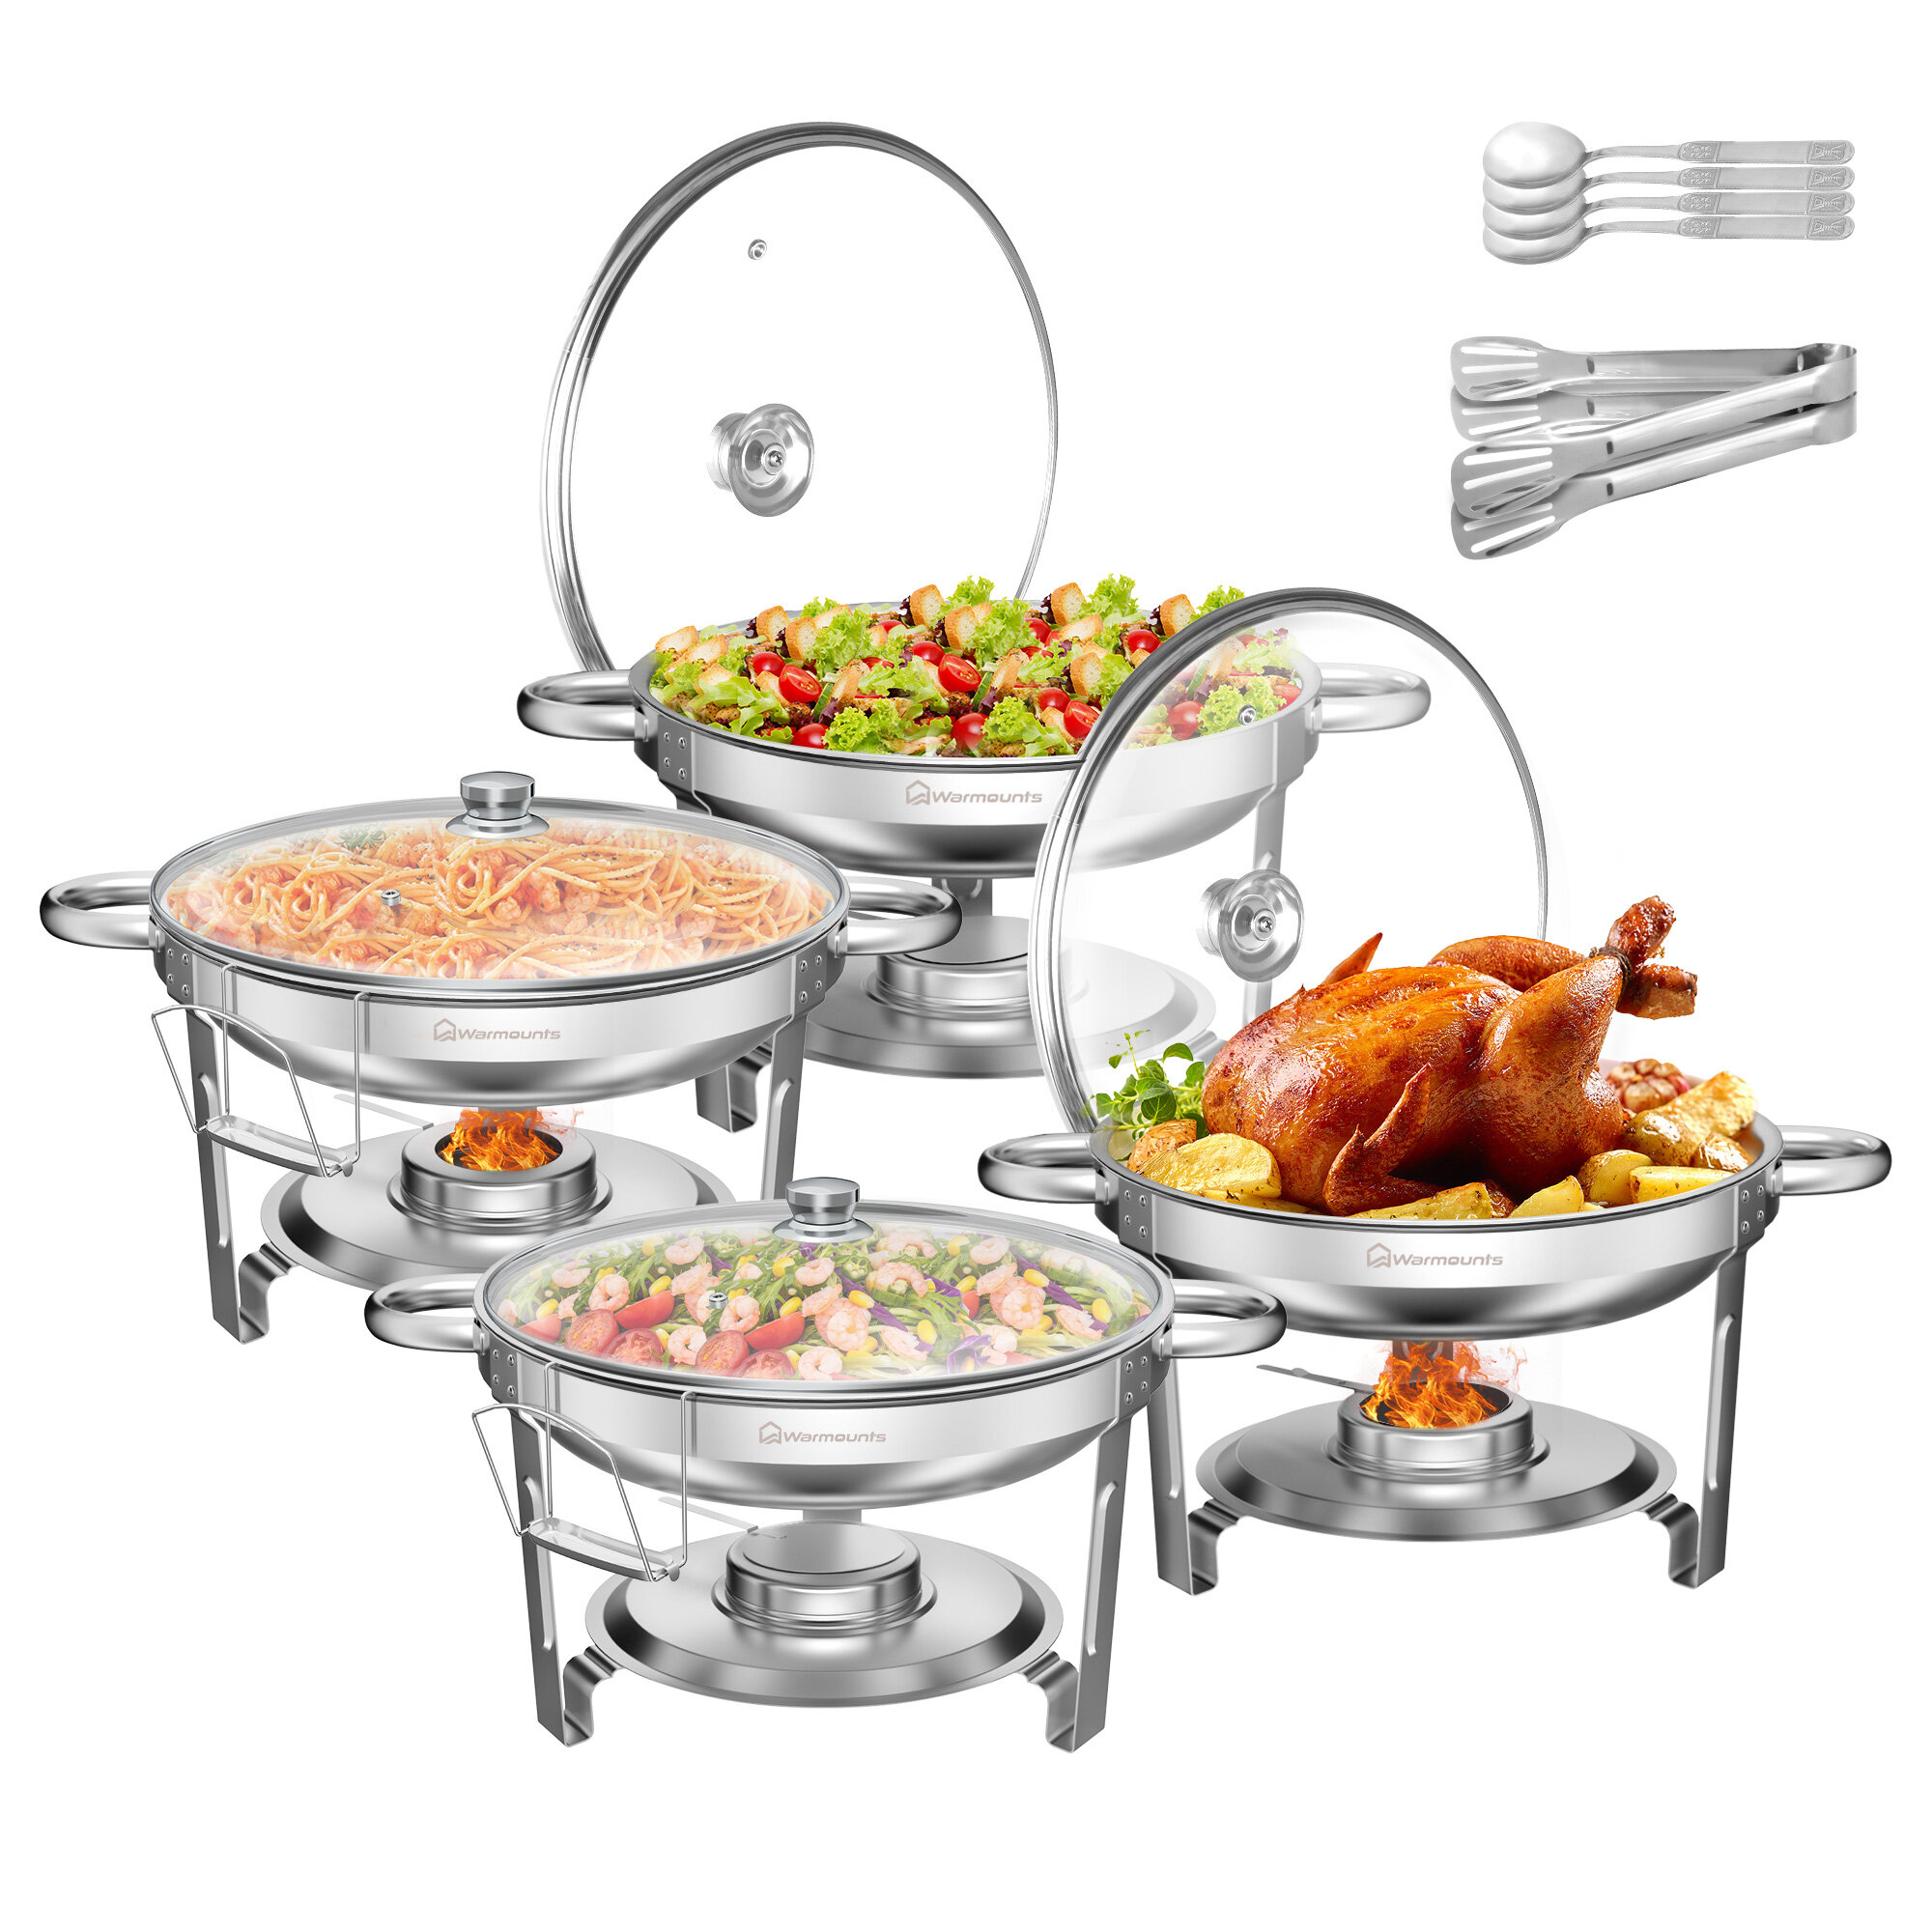 

Warmounts 4-Pack Chafing Dish Buffet Set, 5QT Round Buffet Servers and Warmers Set, Stainless Steel Catering Food Warmer